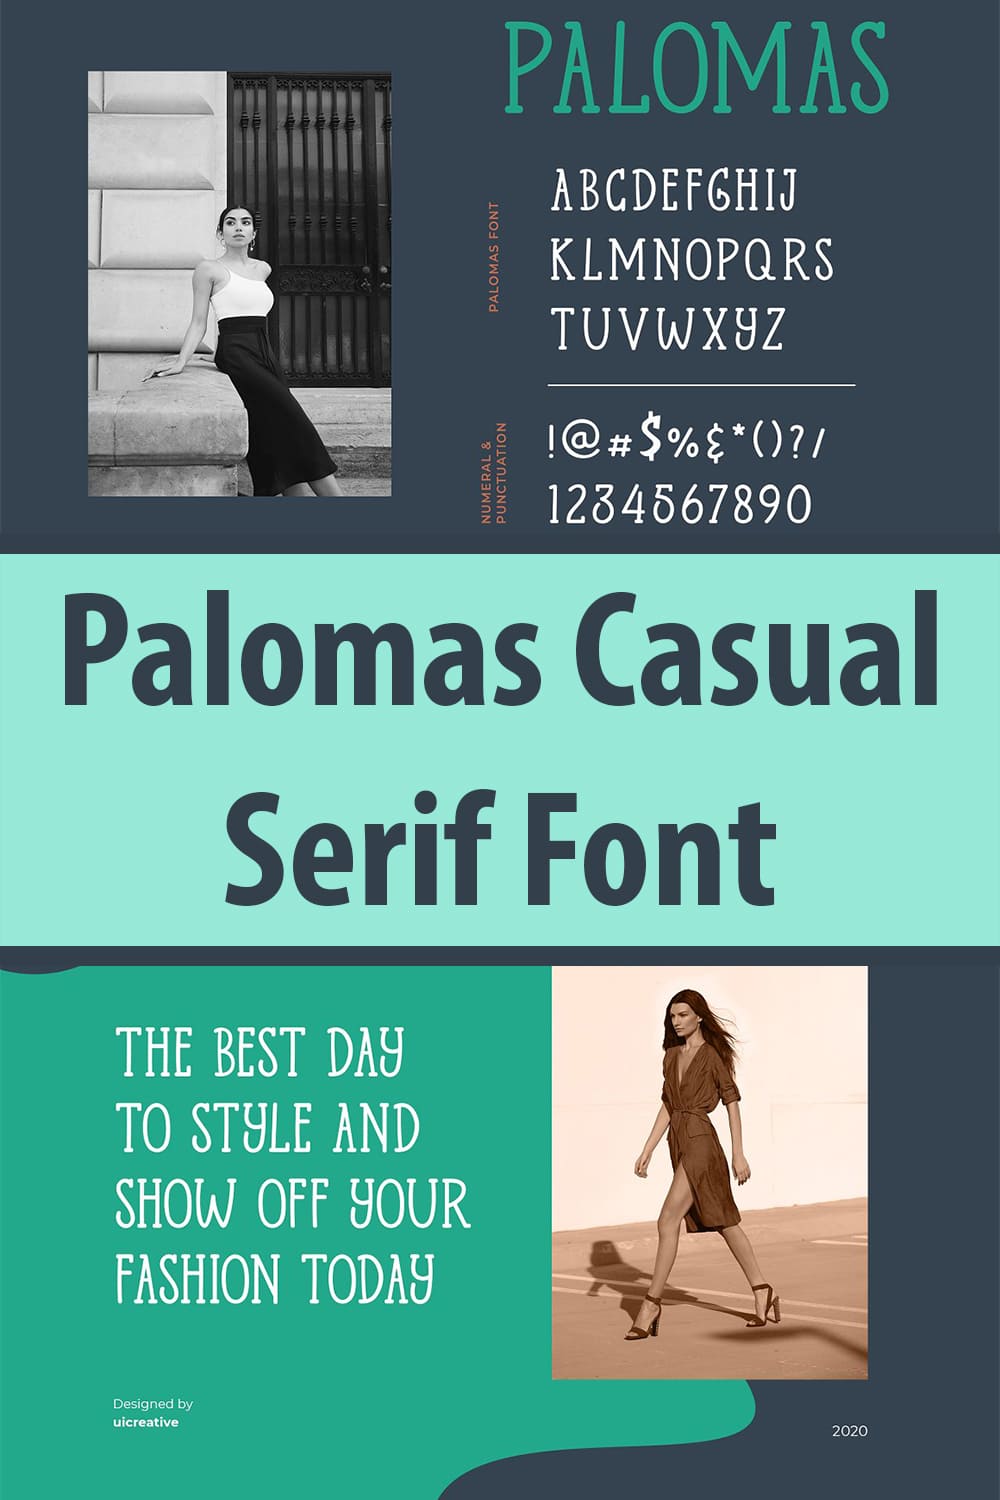 Palomas Casual Serif Font Preview -"The Best Day To Style And Show Off Your Fashion Today".